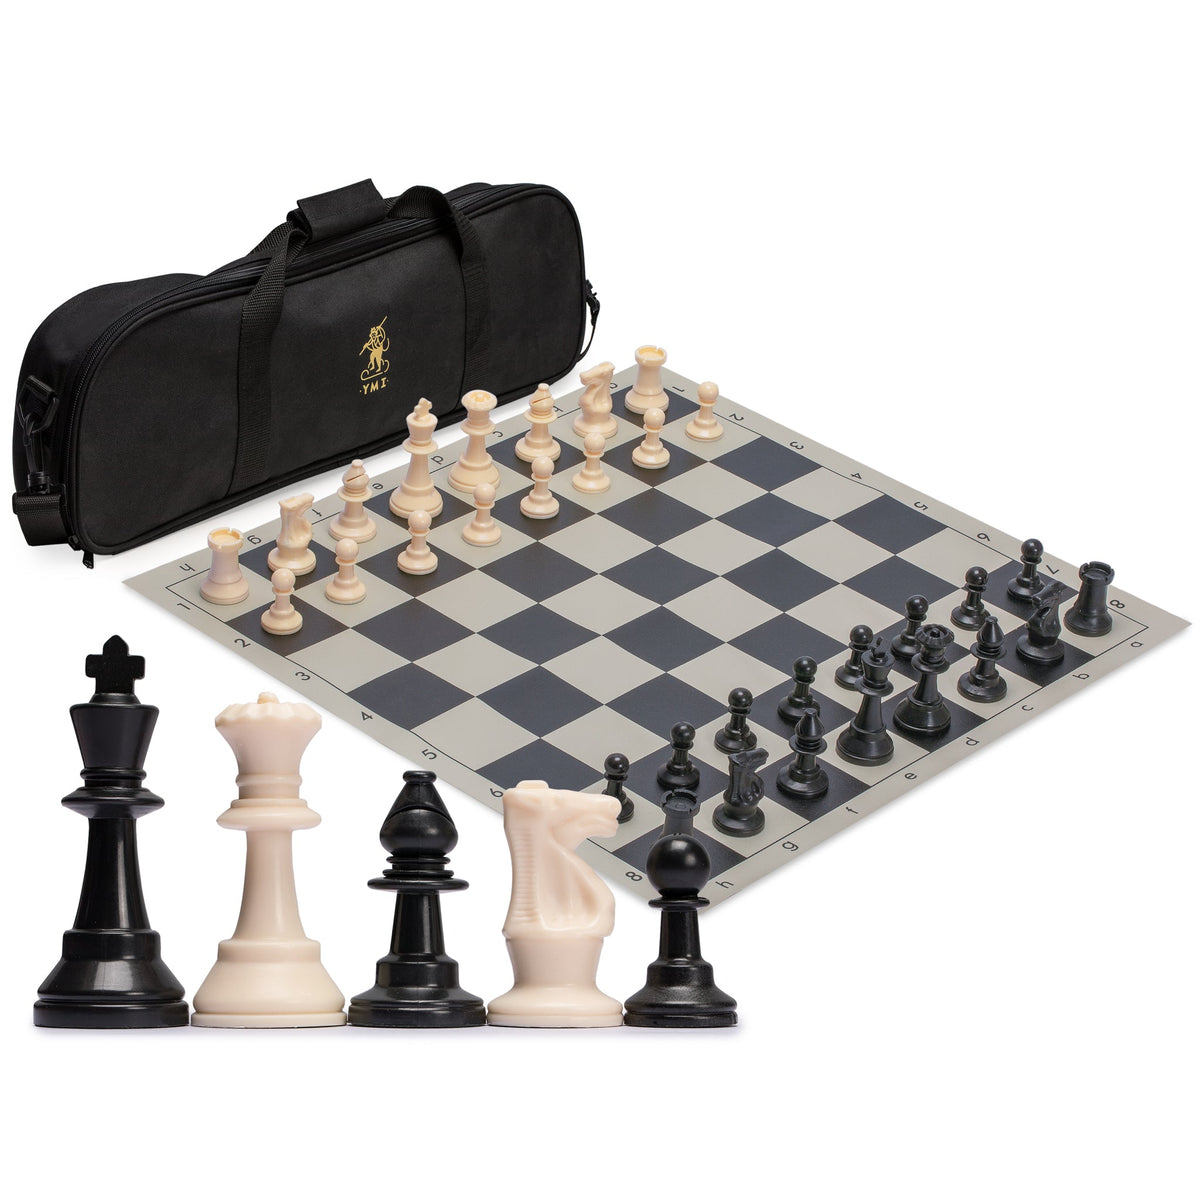 Roll-up vinyl chess Board 50x50 (with coordinates), chess board